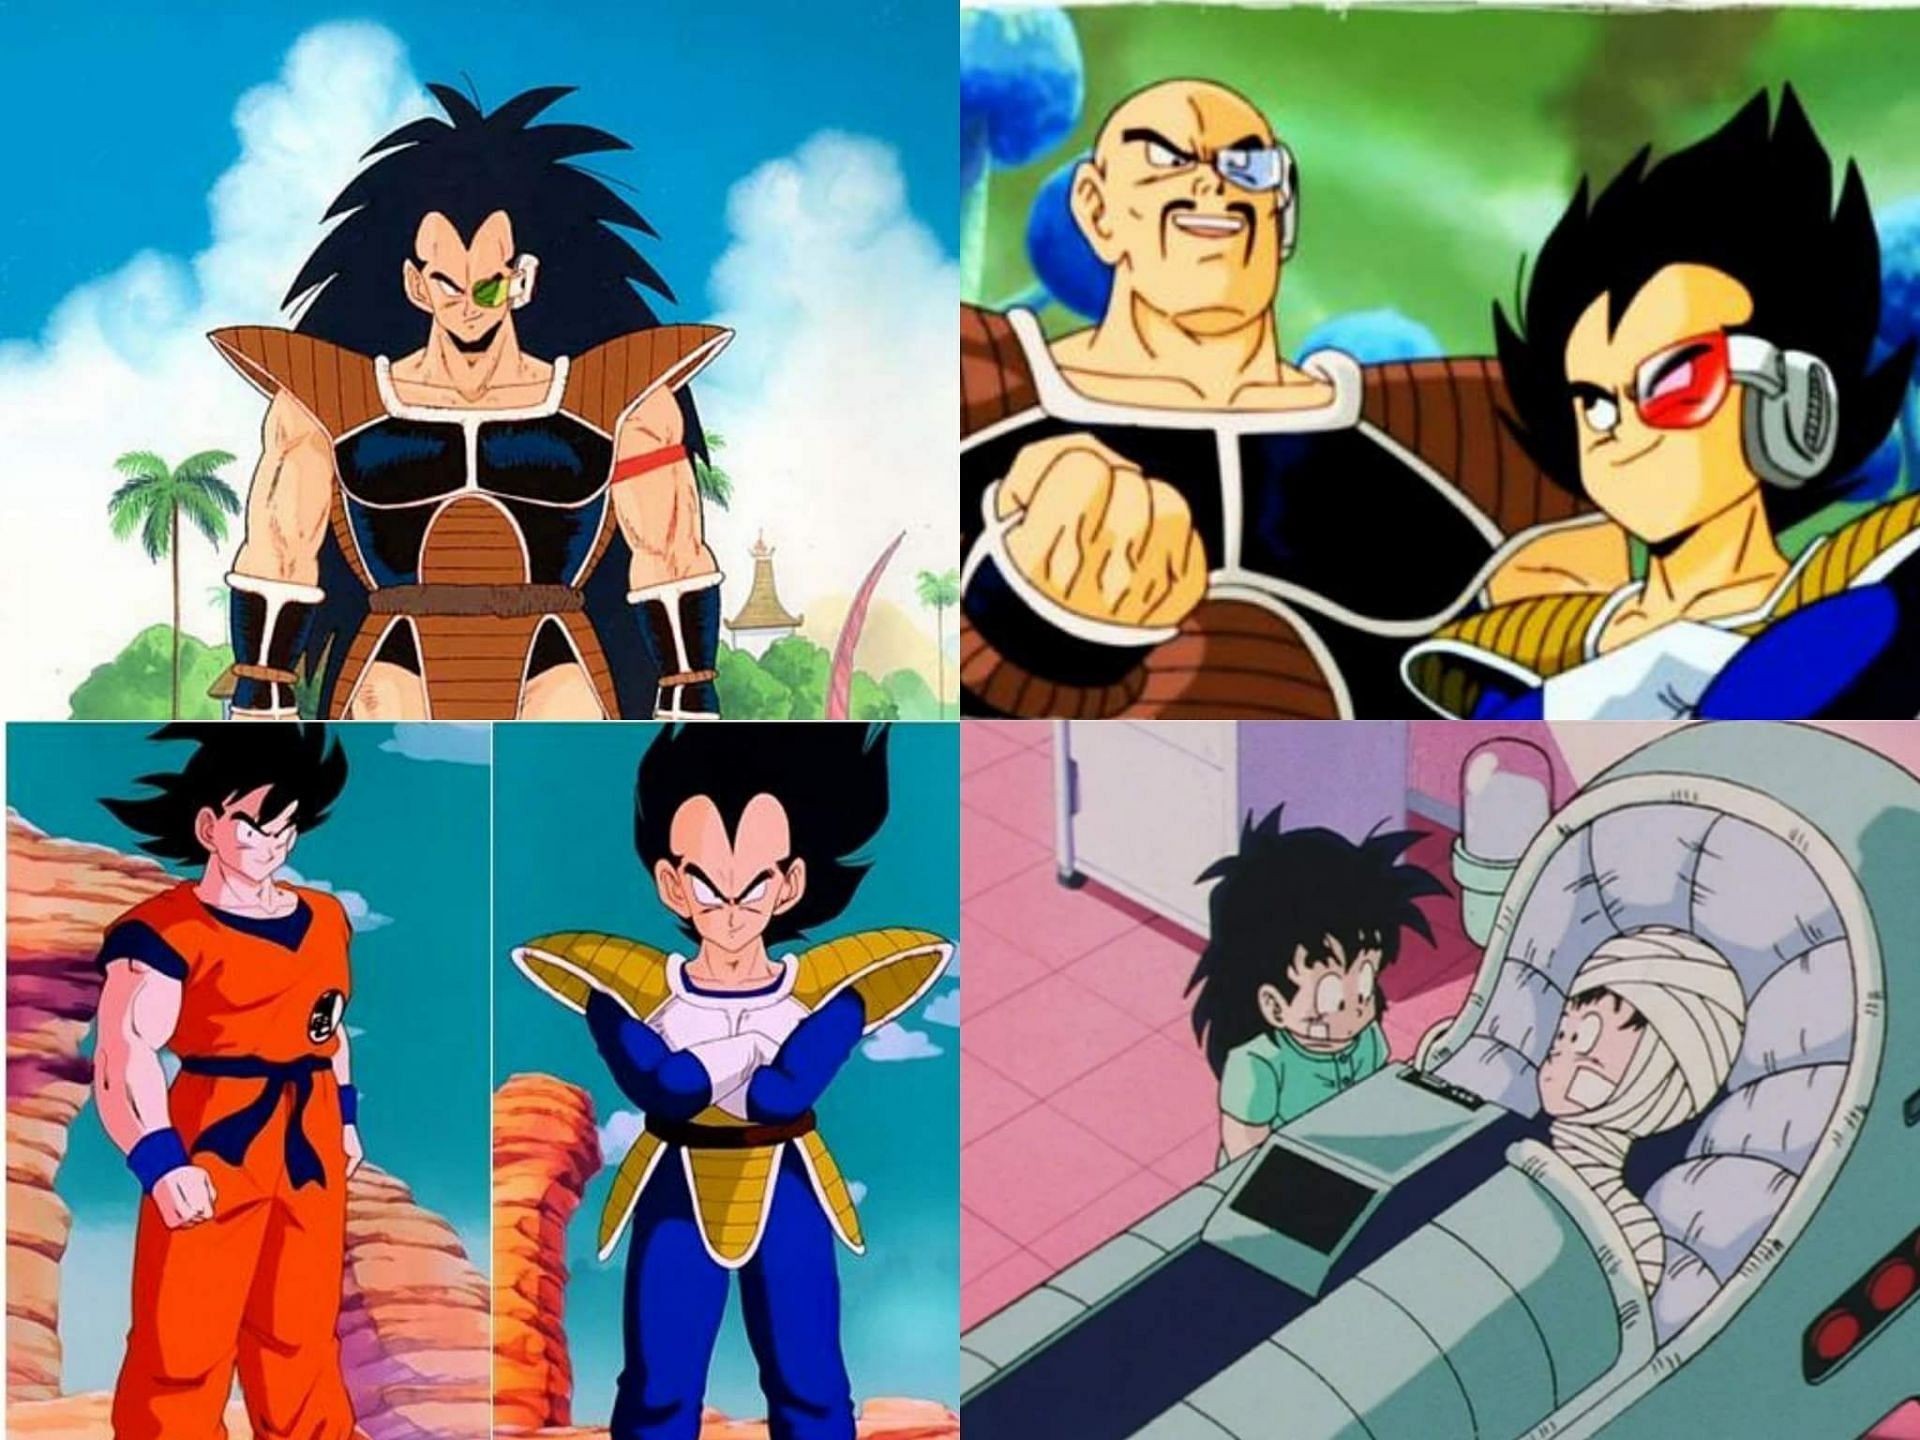 So which one is the better game? : r/dbz